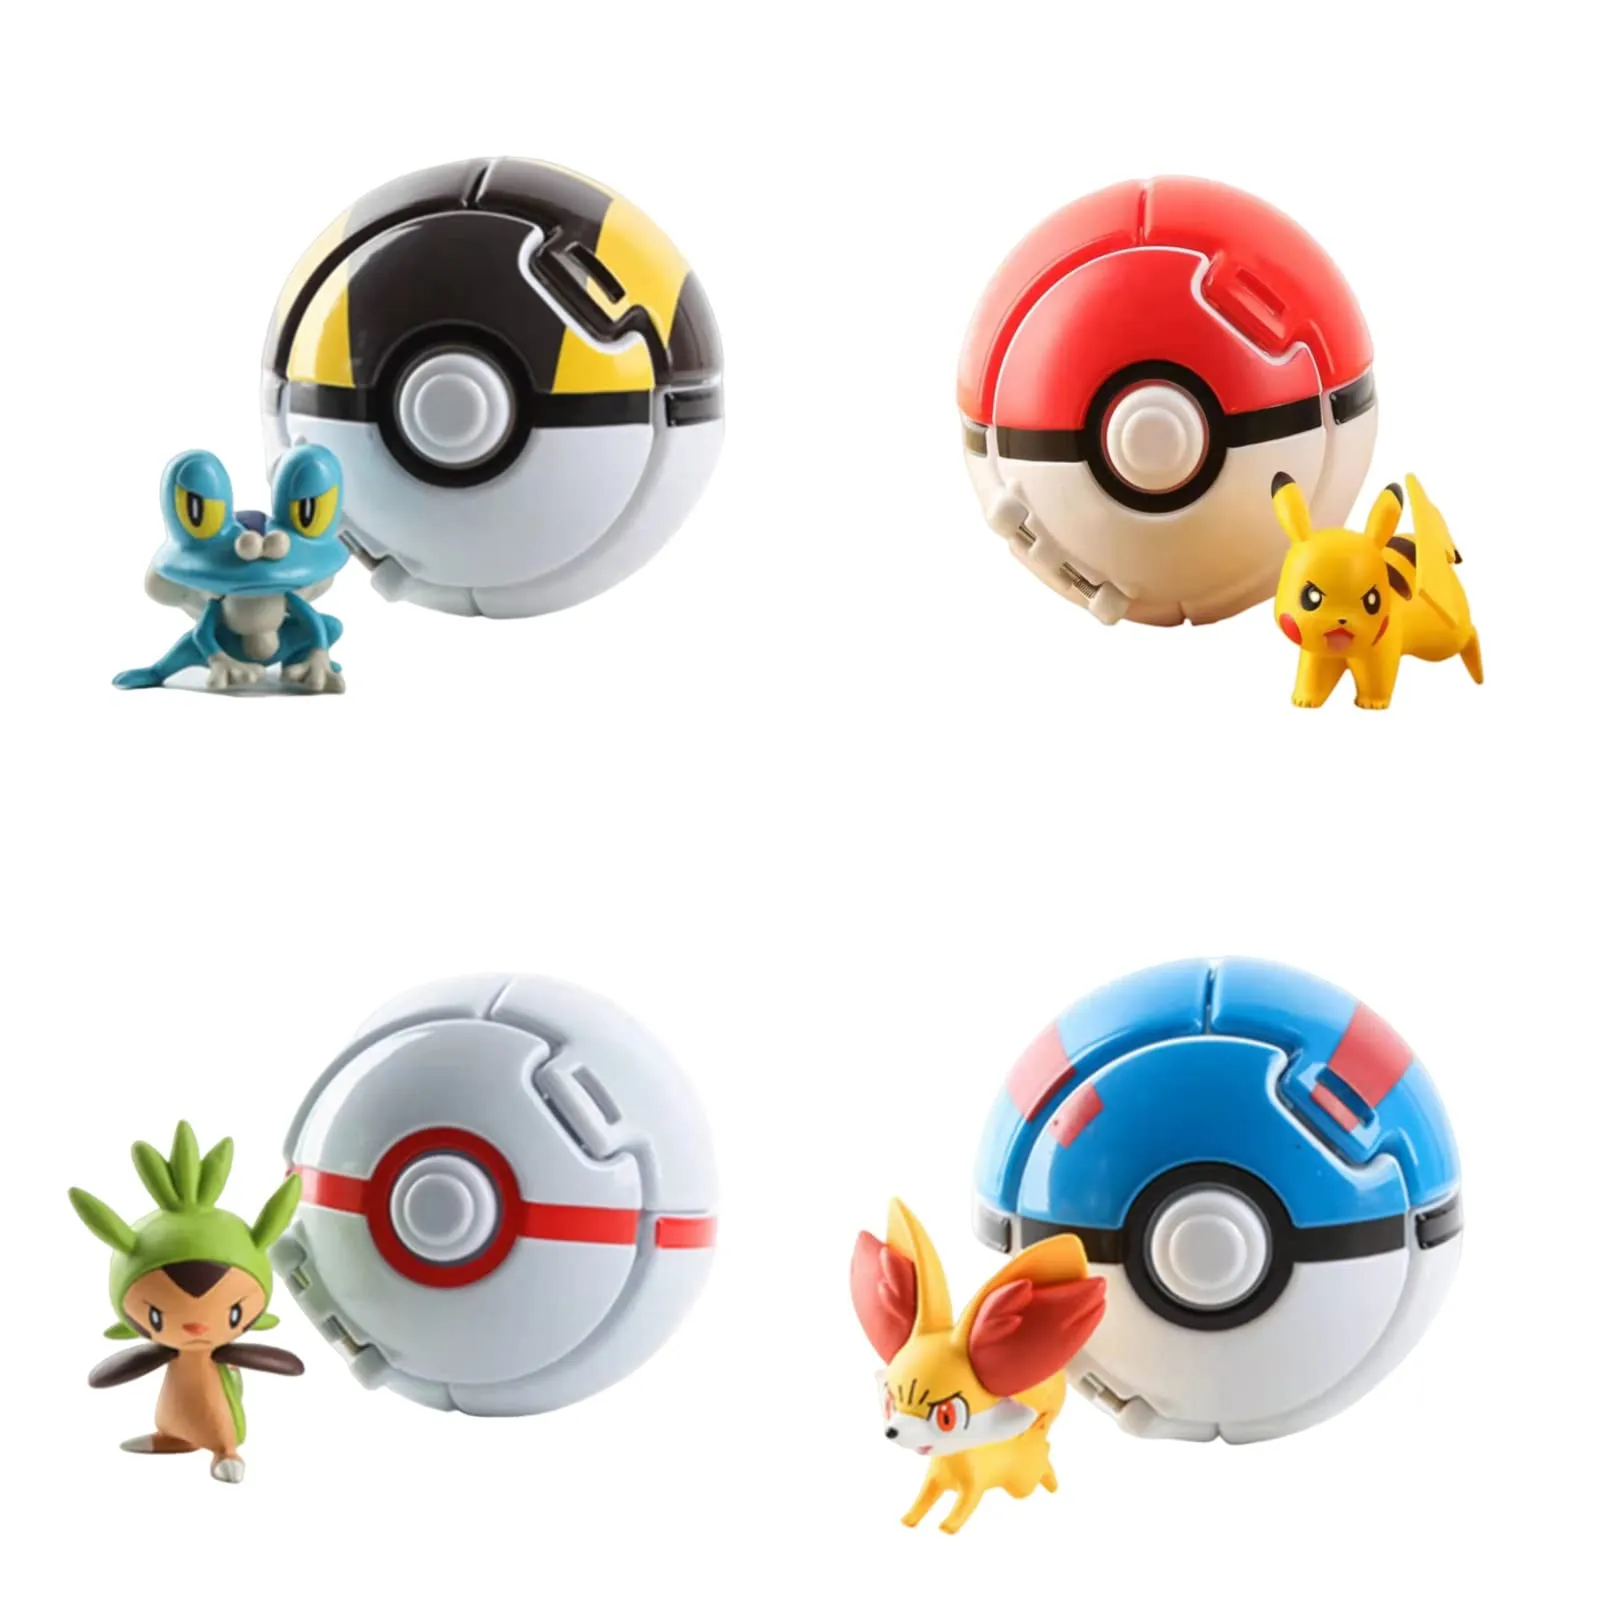 3ml pocket ball playset with battle action figure childrens toy set action figure gift creative toys